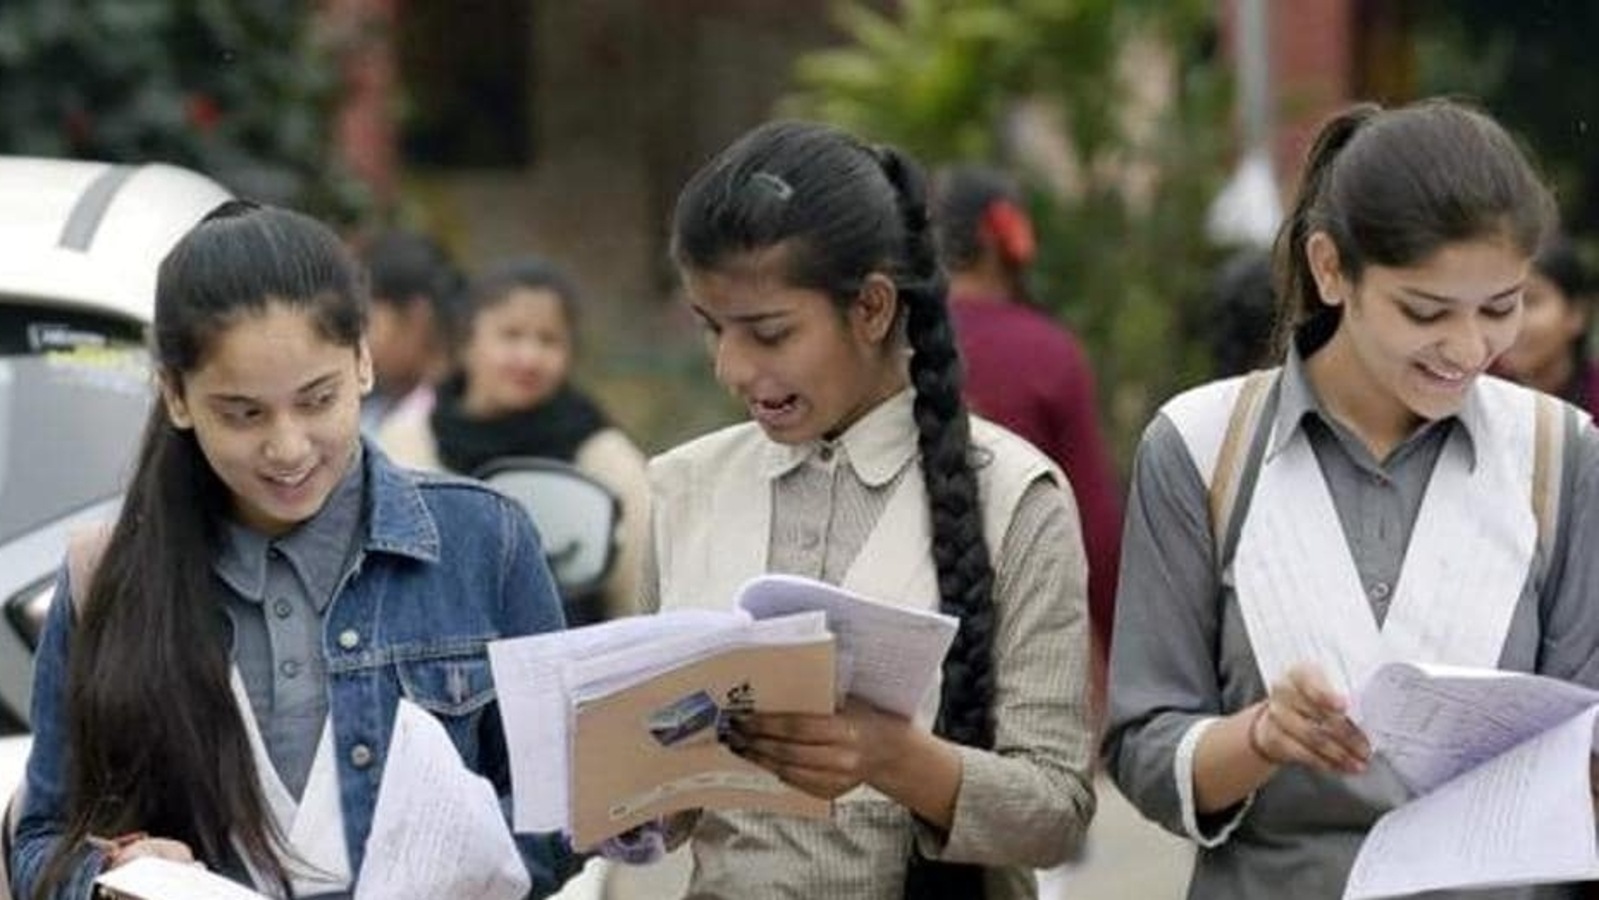 Bihar Board 12th Result 2022 Live updates: BSEB Inter result releasing at 3 pm